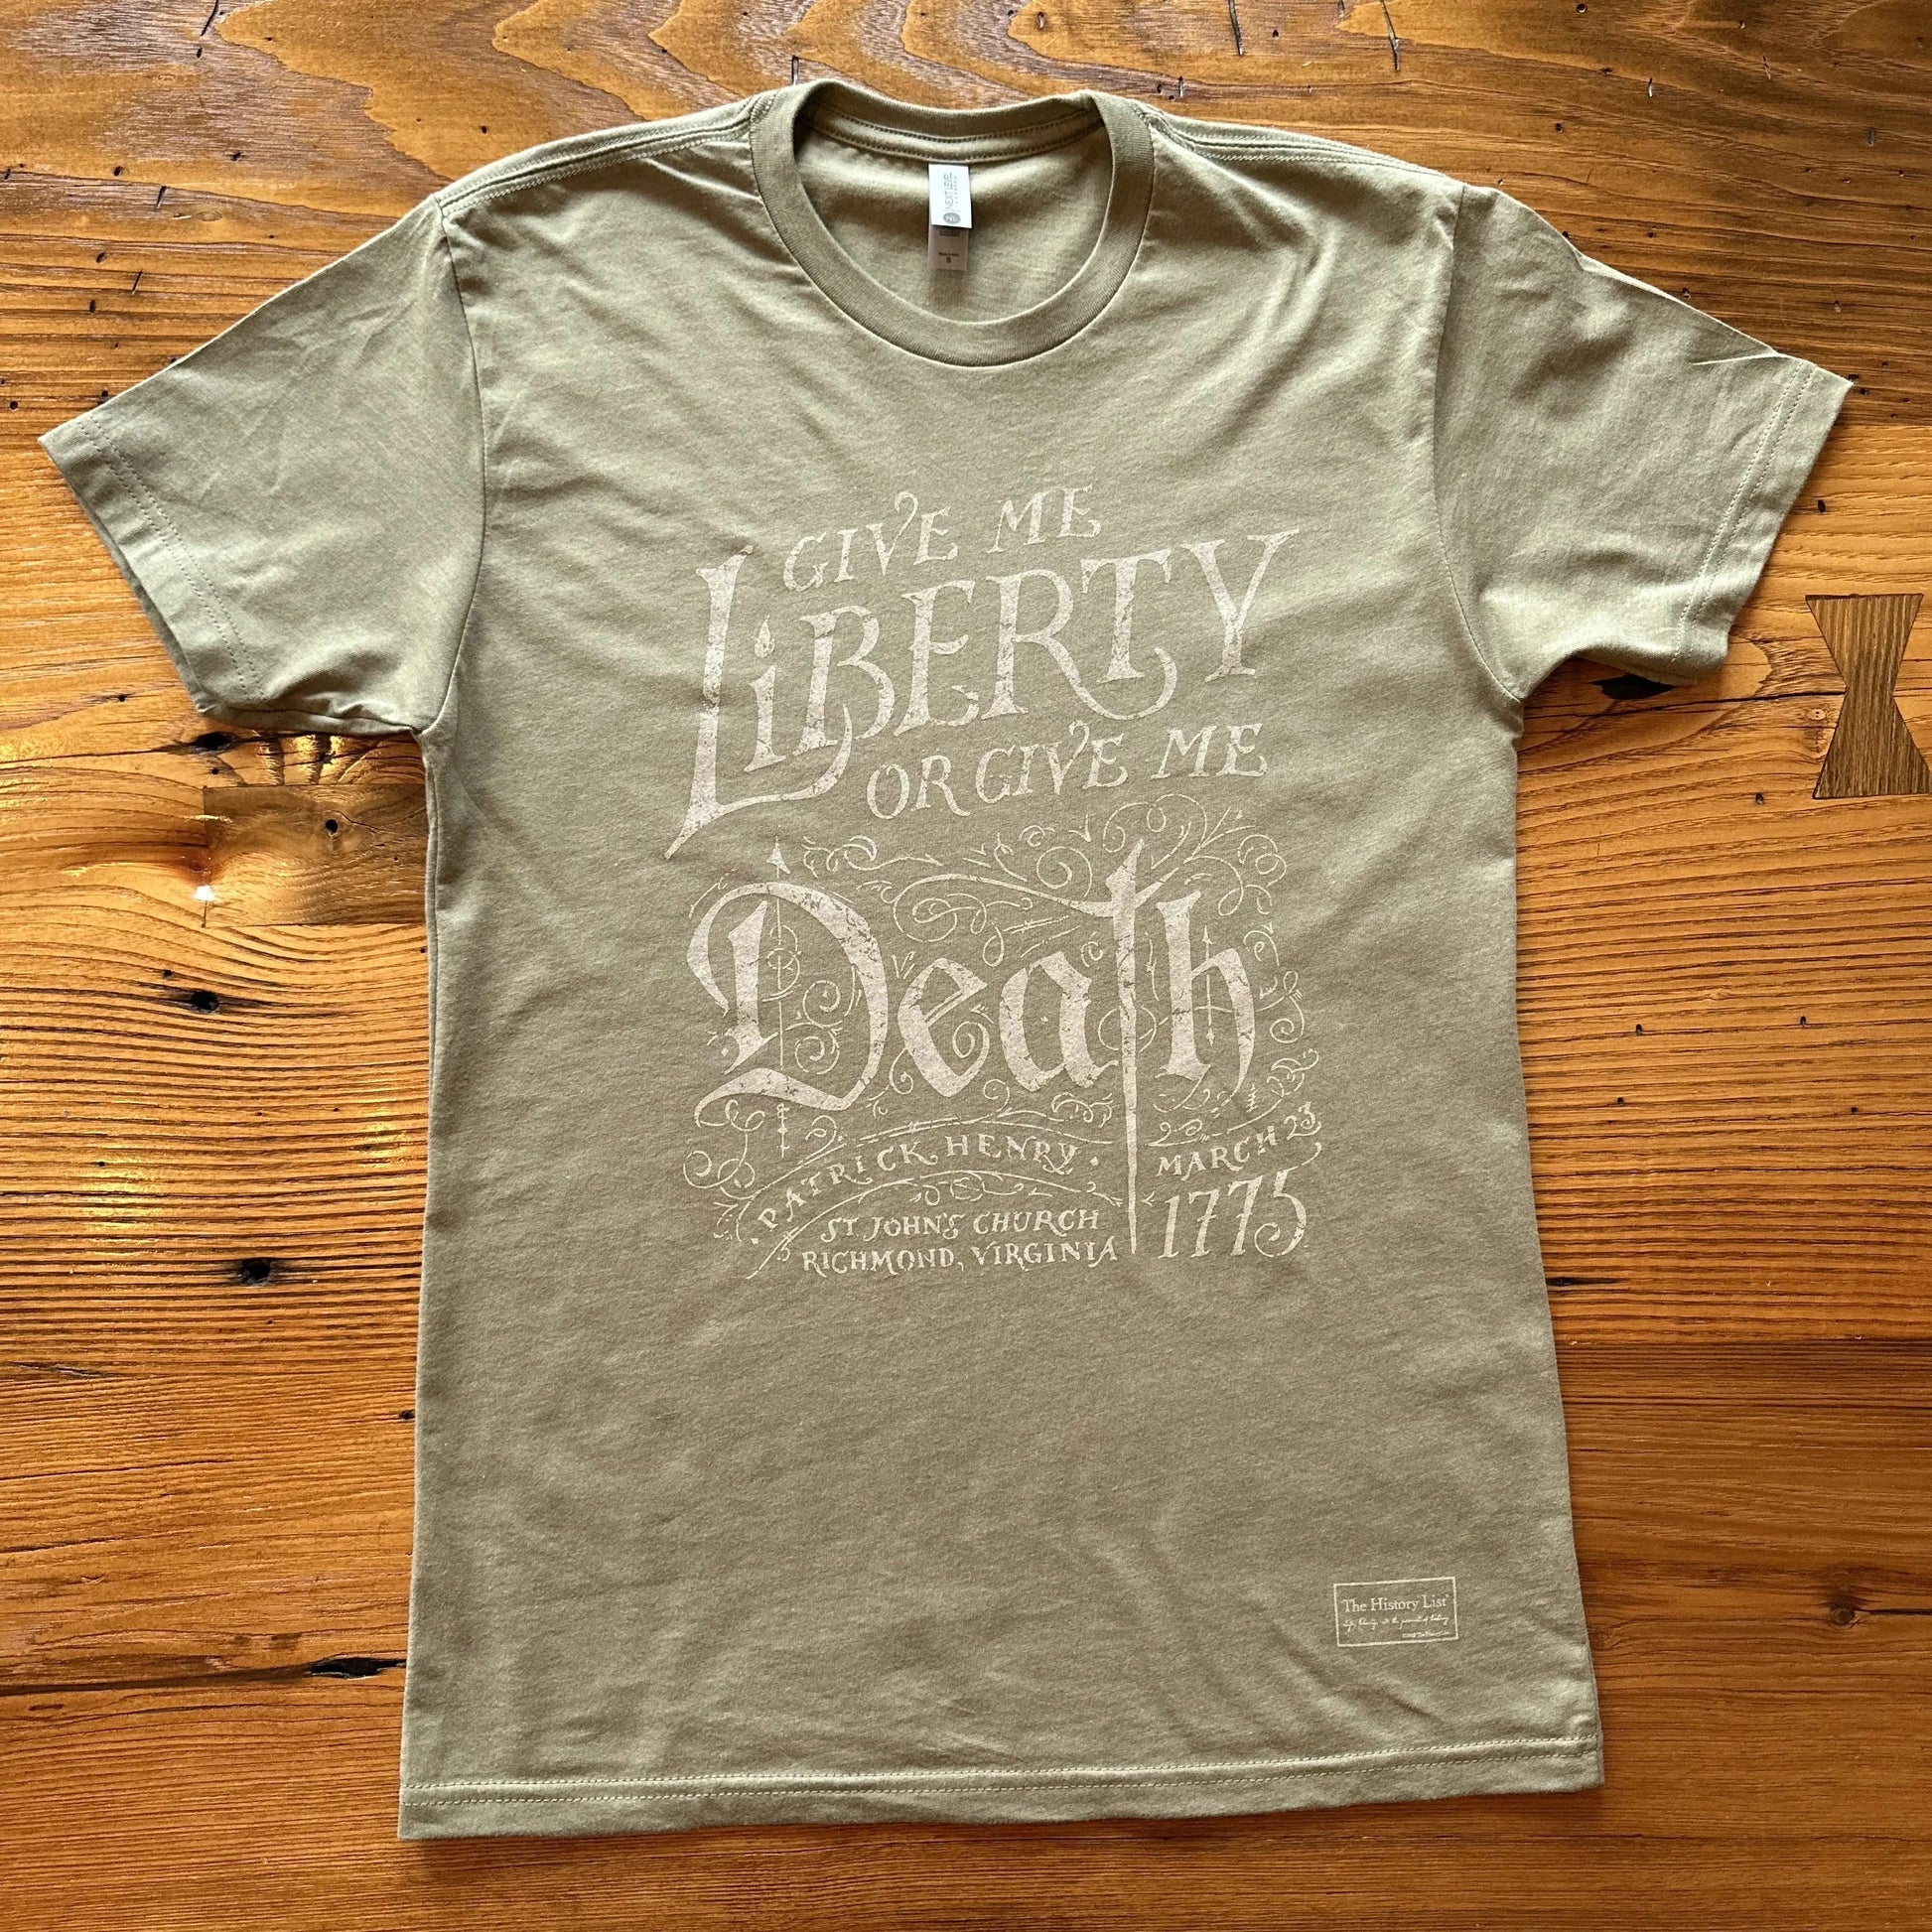 "Give me liberty, or give me death!" Shirt in Olive green from The History List store